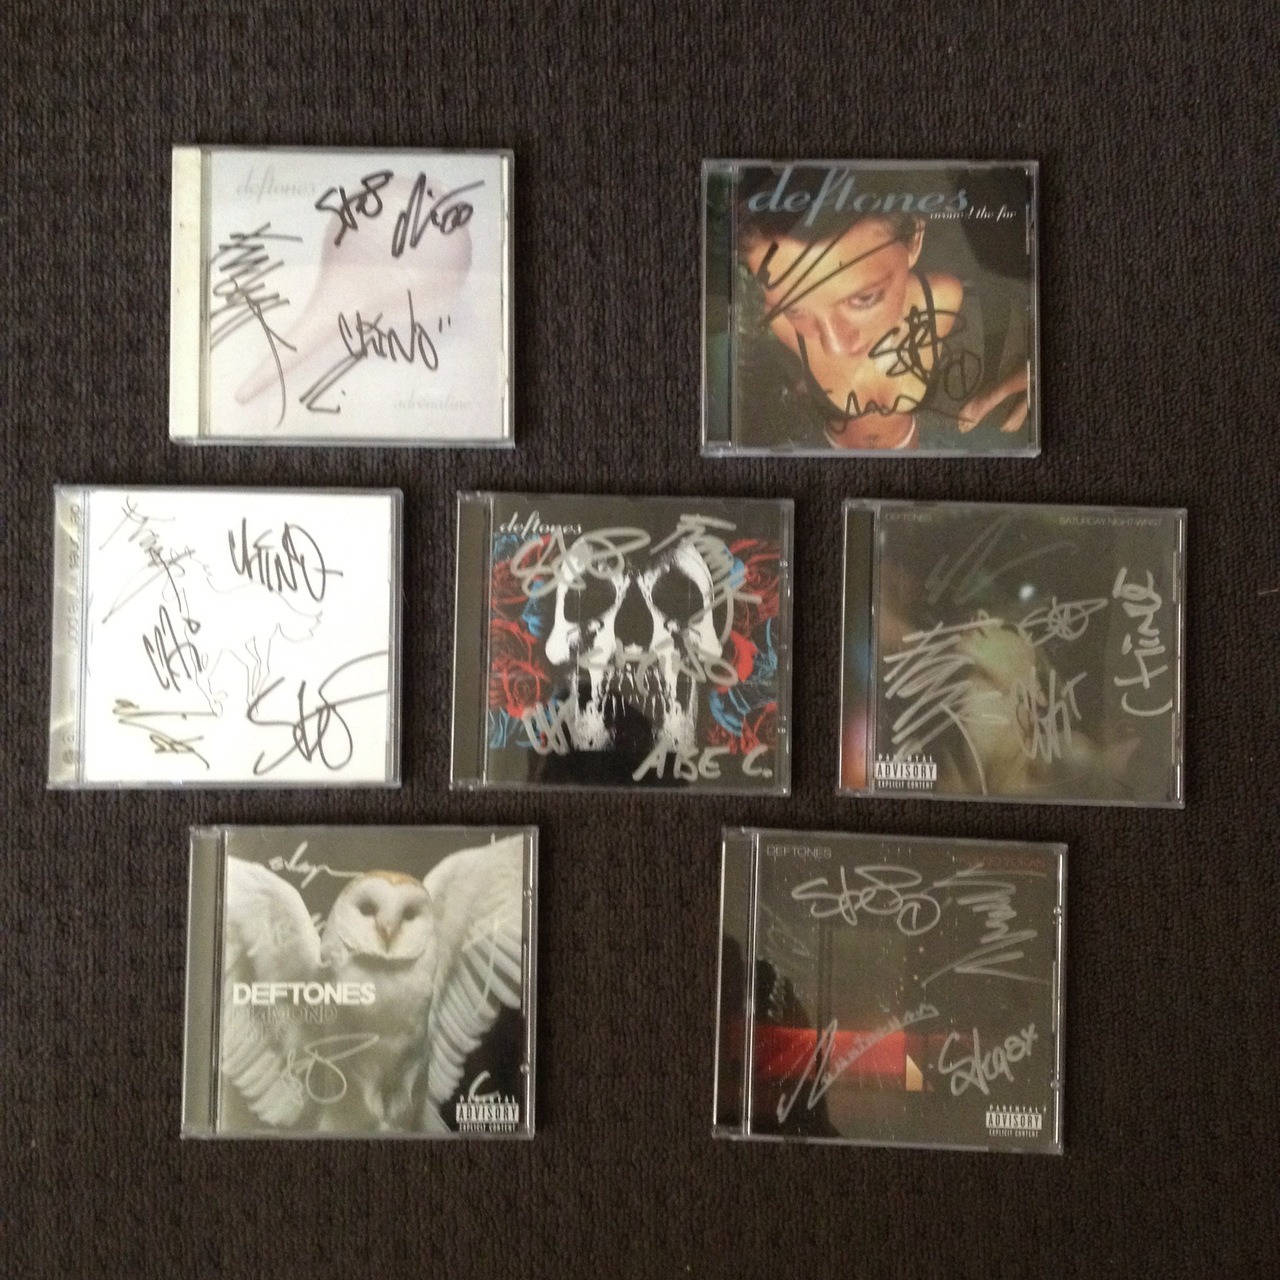 cmnd0ctrl:  I finally finished my collection of signed Deftones albums today! ^_^